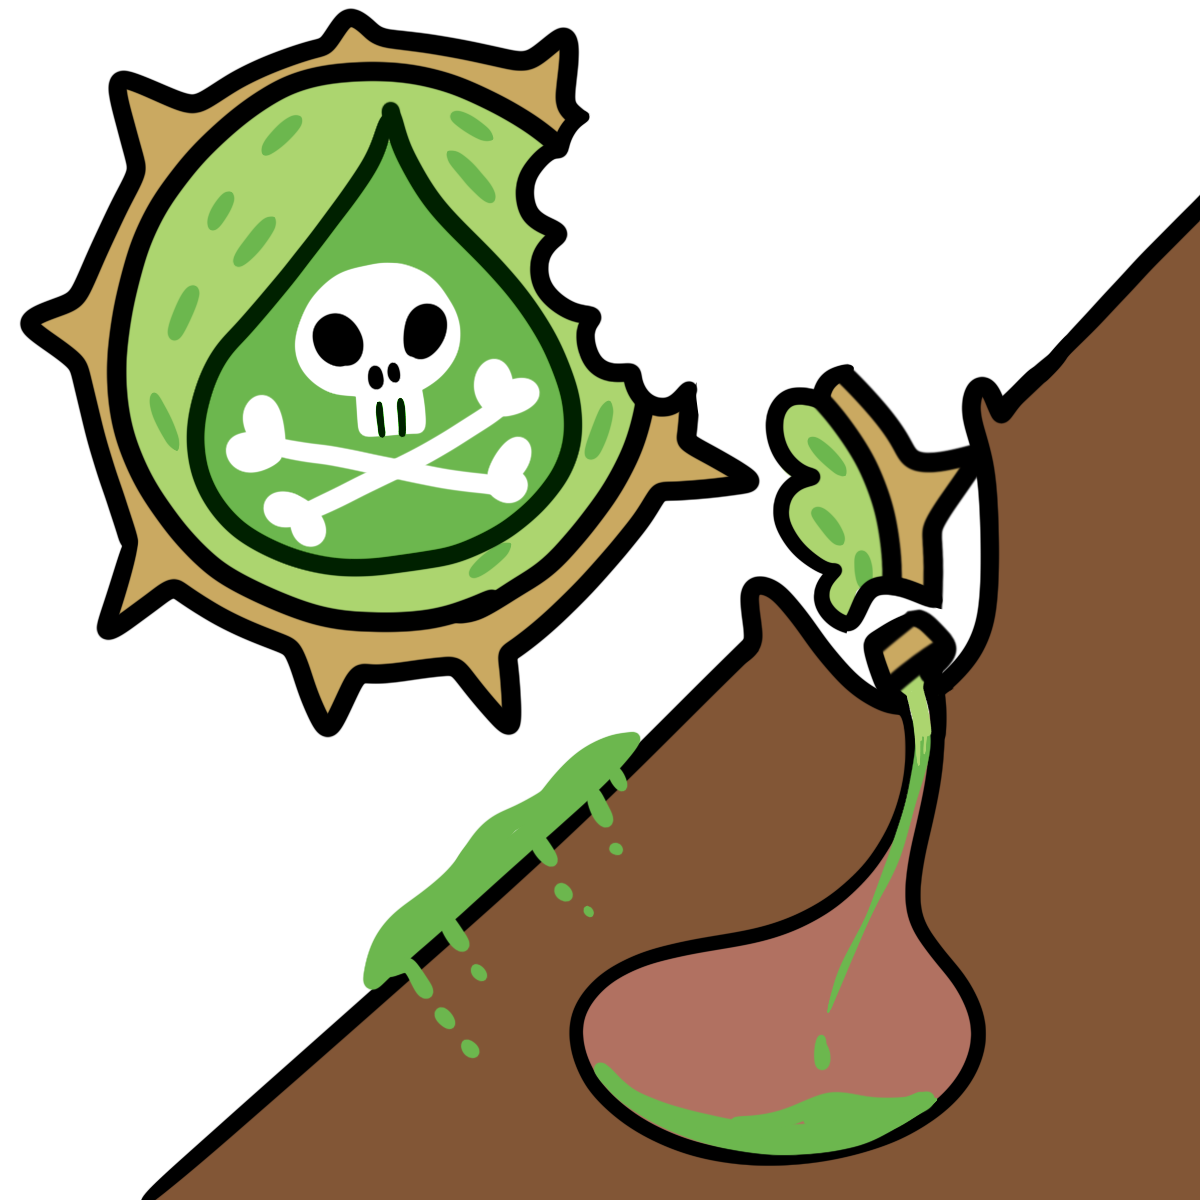 spiky green blob containing green droplet with white skull and crossbones has piece bitten off that is in mouth of brown corner . green drips down into pink stomach. there is a green puddle on surface.